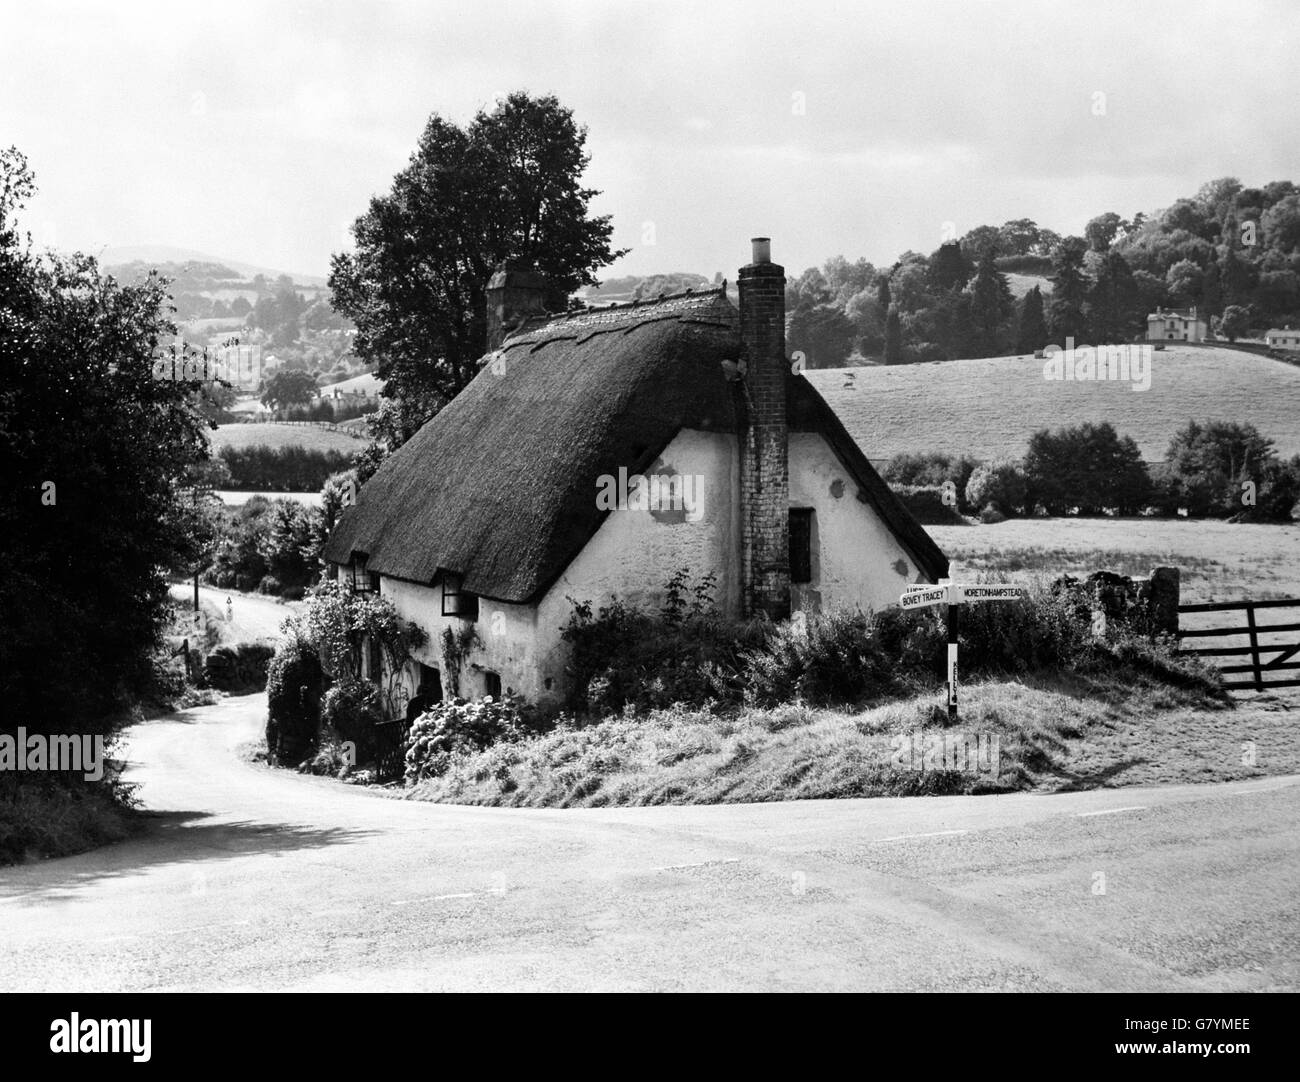 Lustleigh, Devonshire. A thatched cottage in Lustleigh, Devonshire. Stock Photo